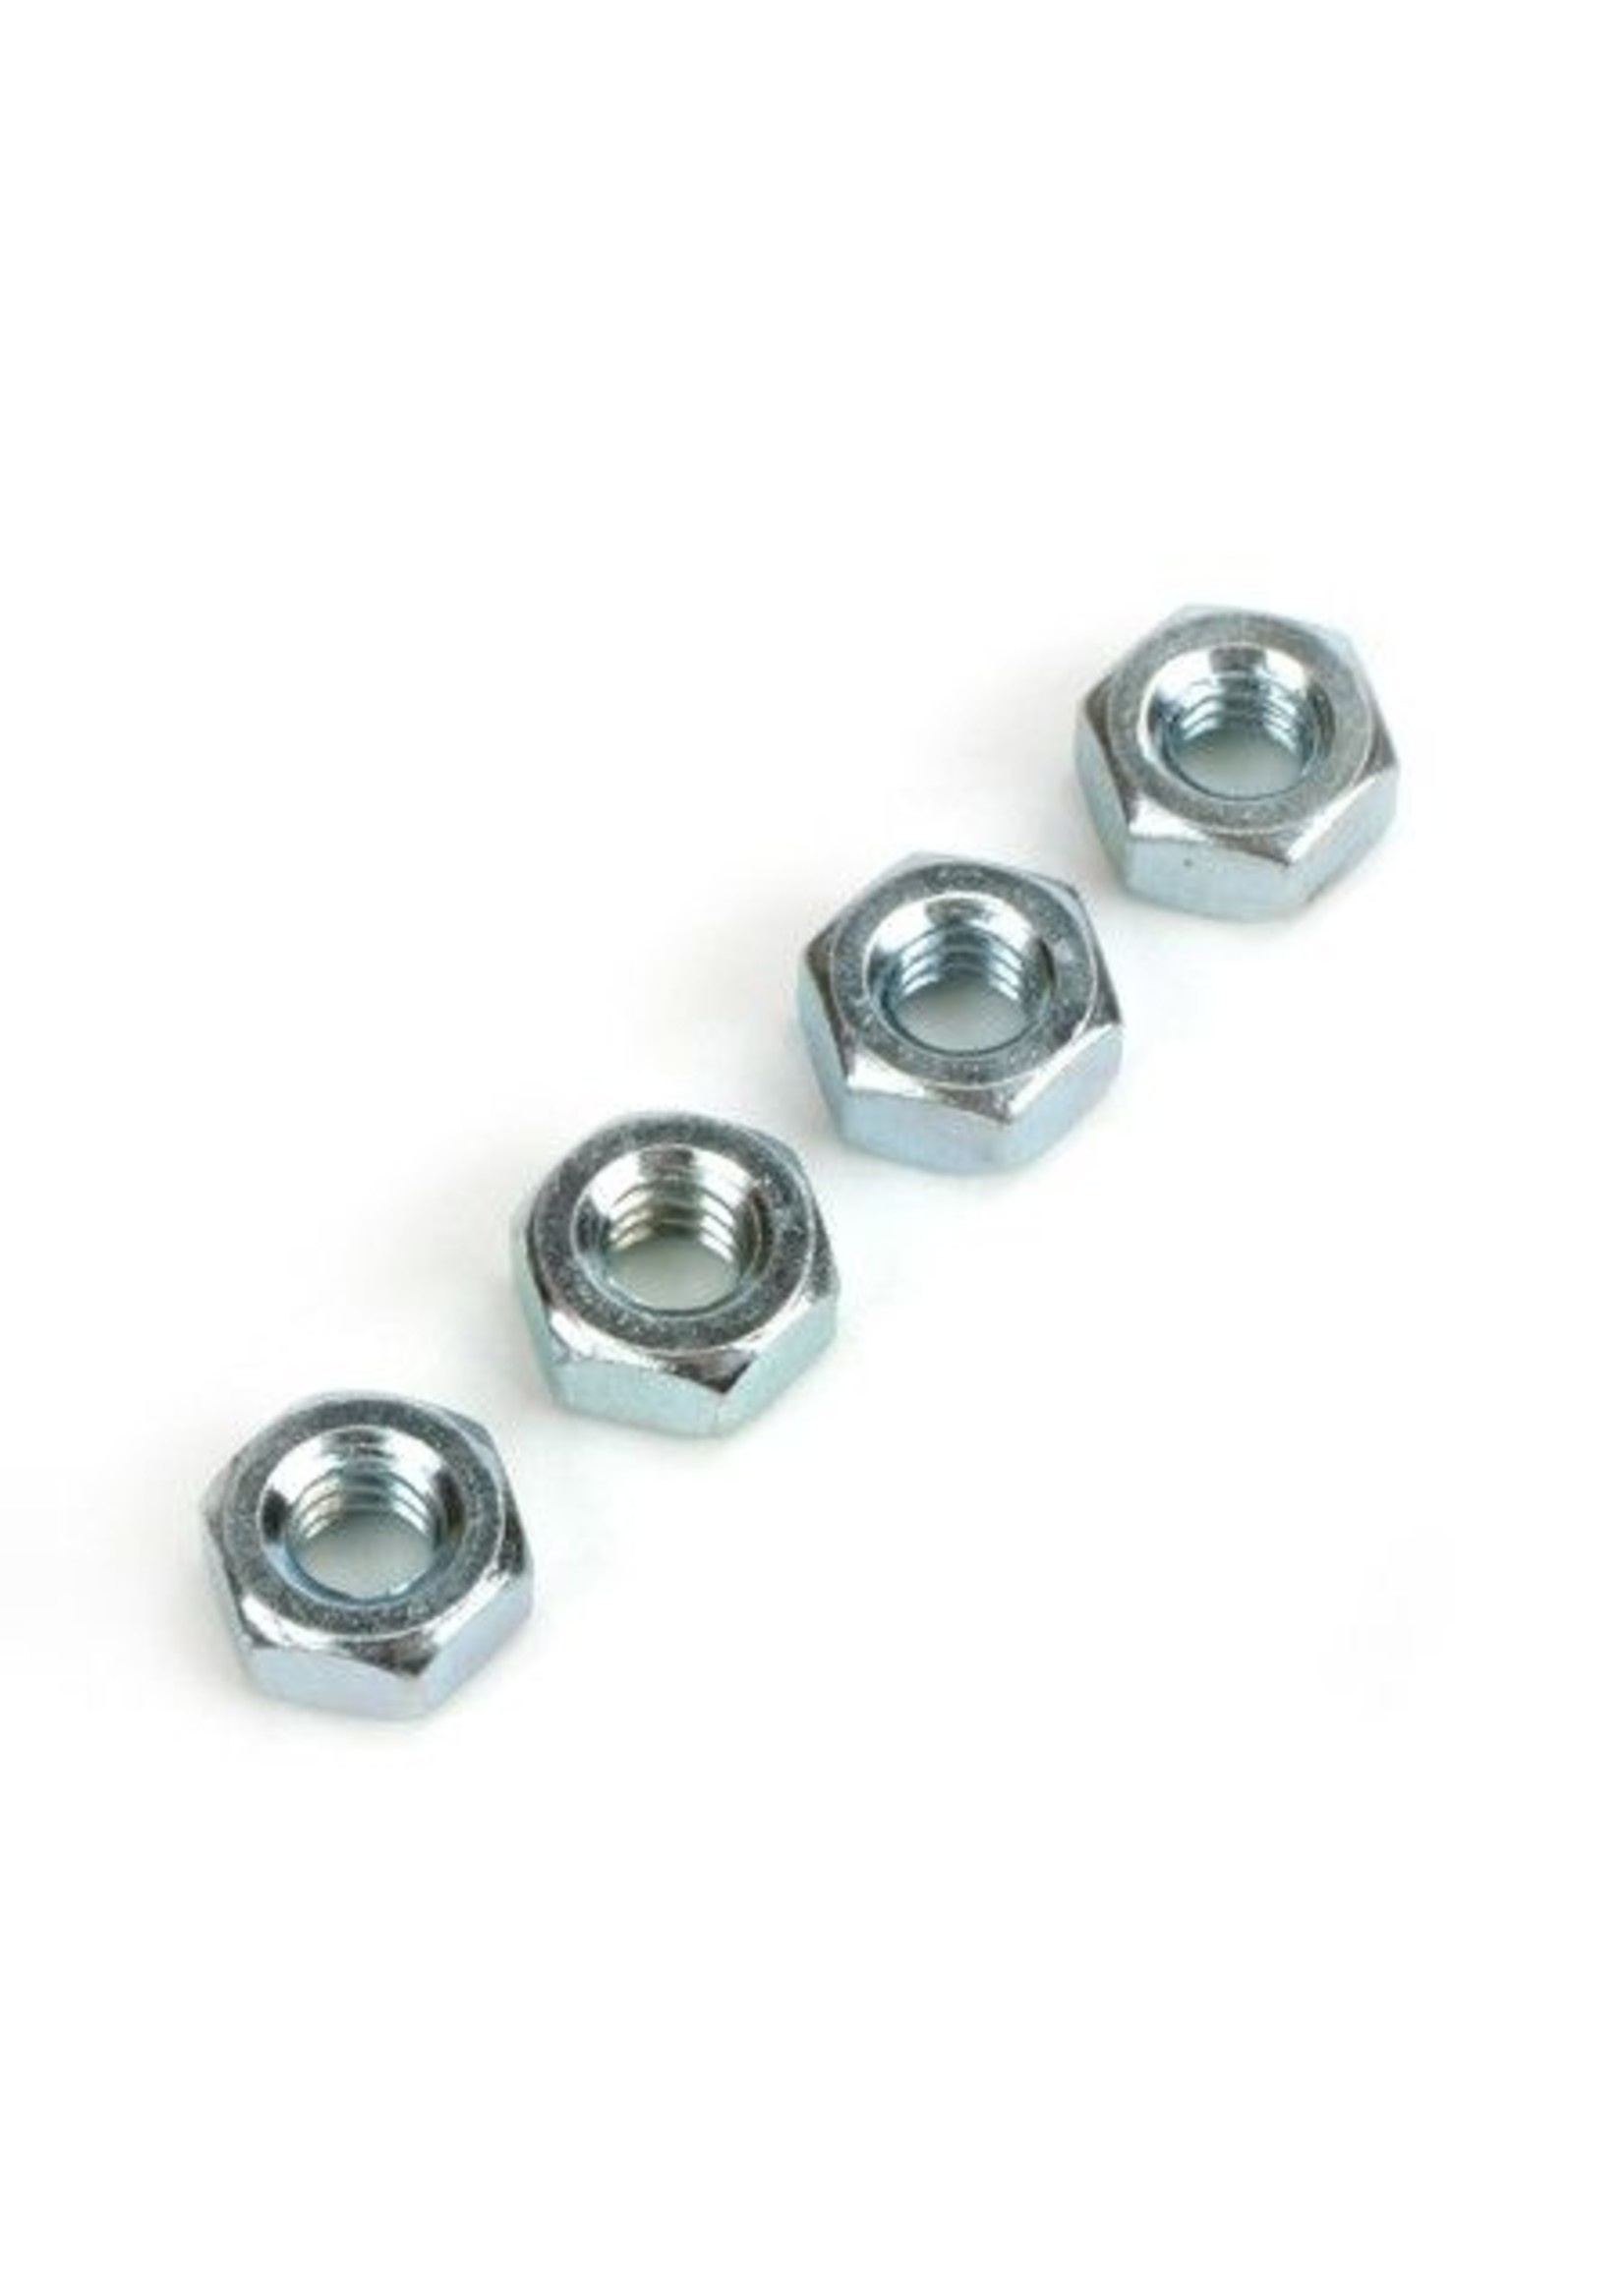 Dubro 654 - Hex Nuts, 1/4-20